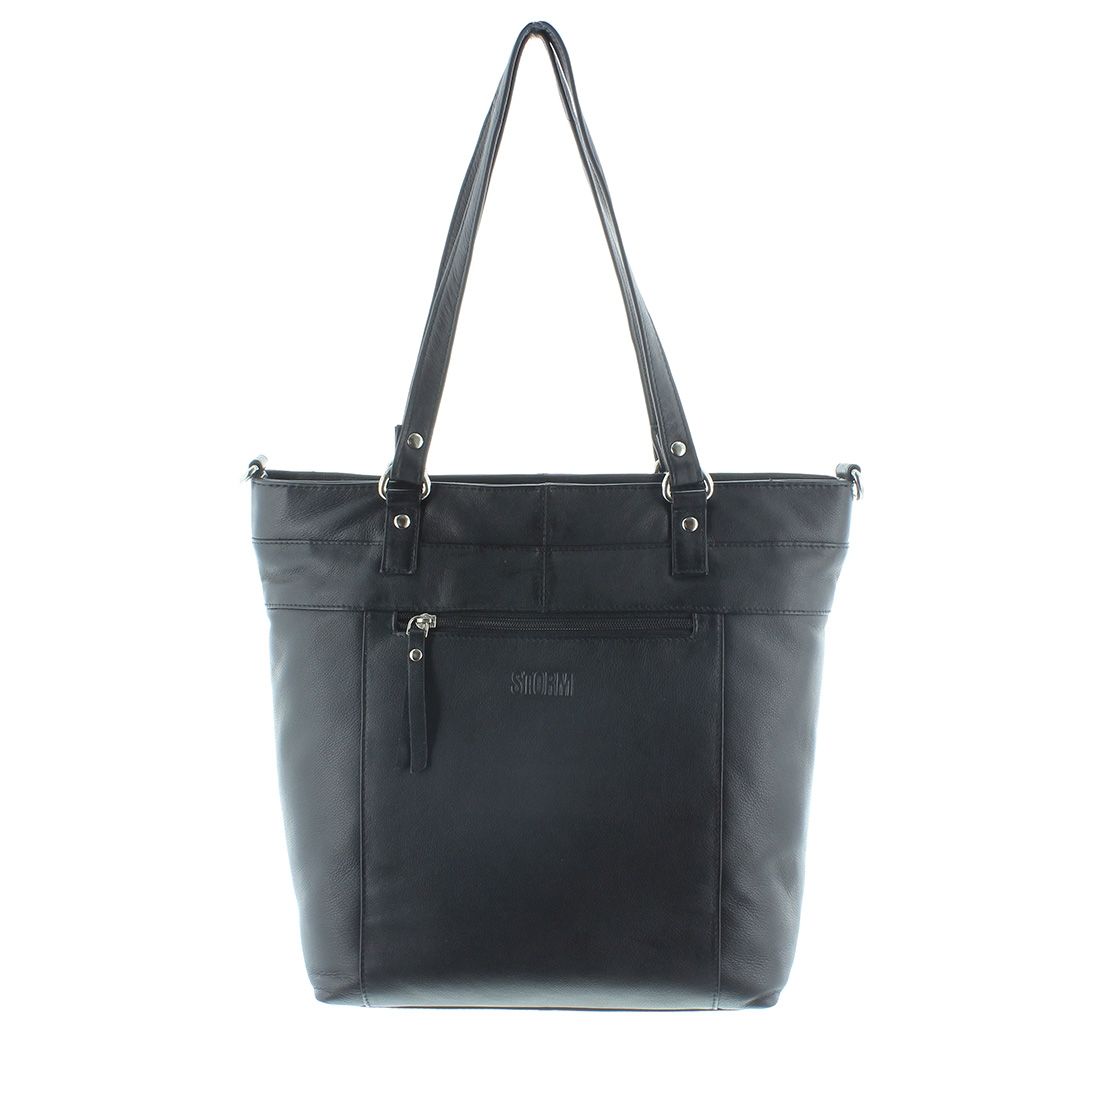 CORBY TOTE BAG BLACK (6STTOT055/BK) - www.StormWatches.com – STORM Watches